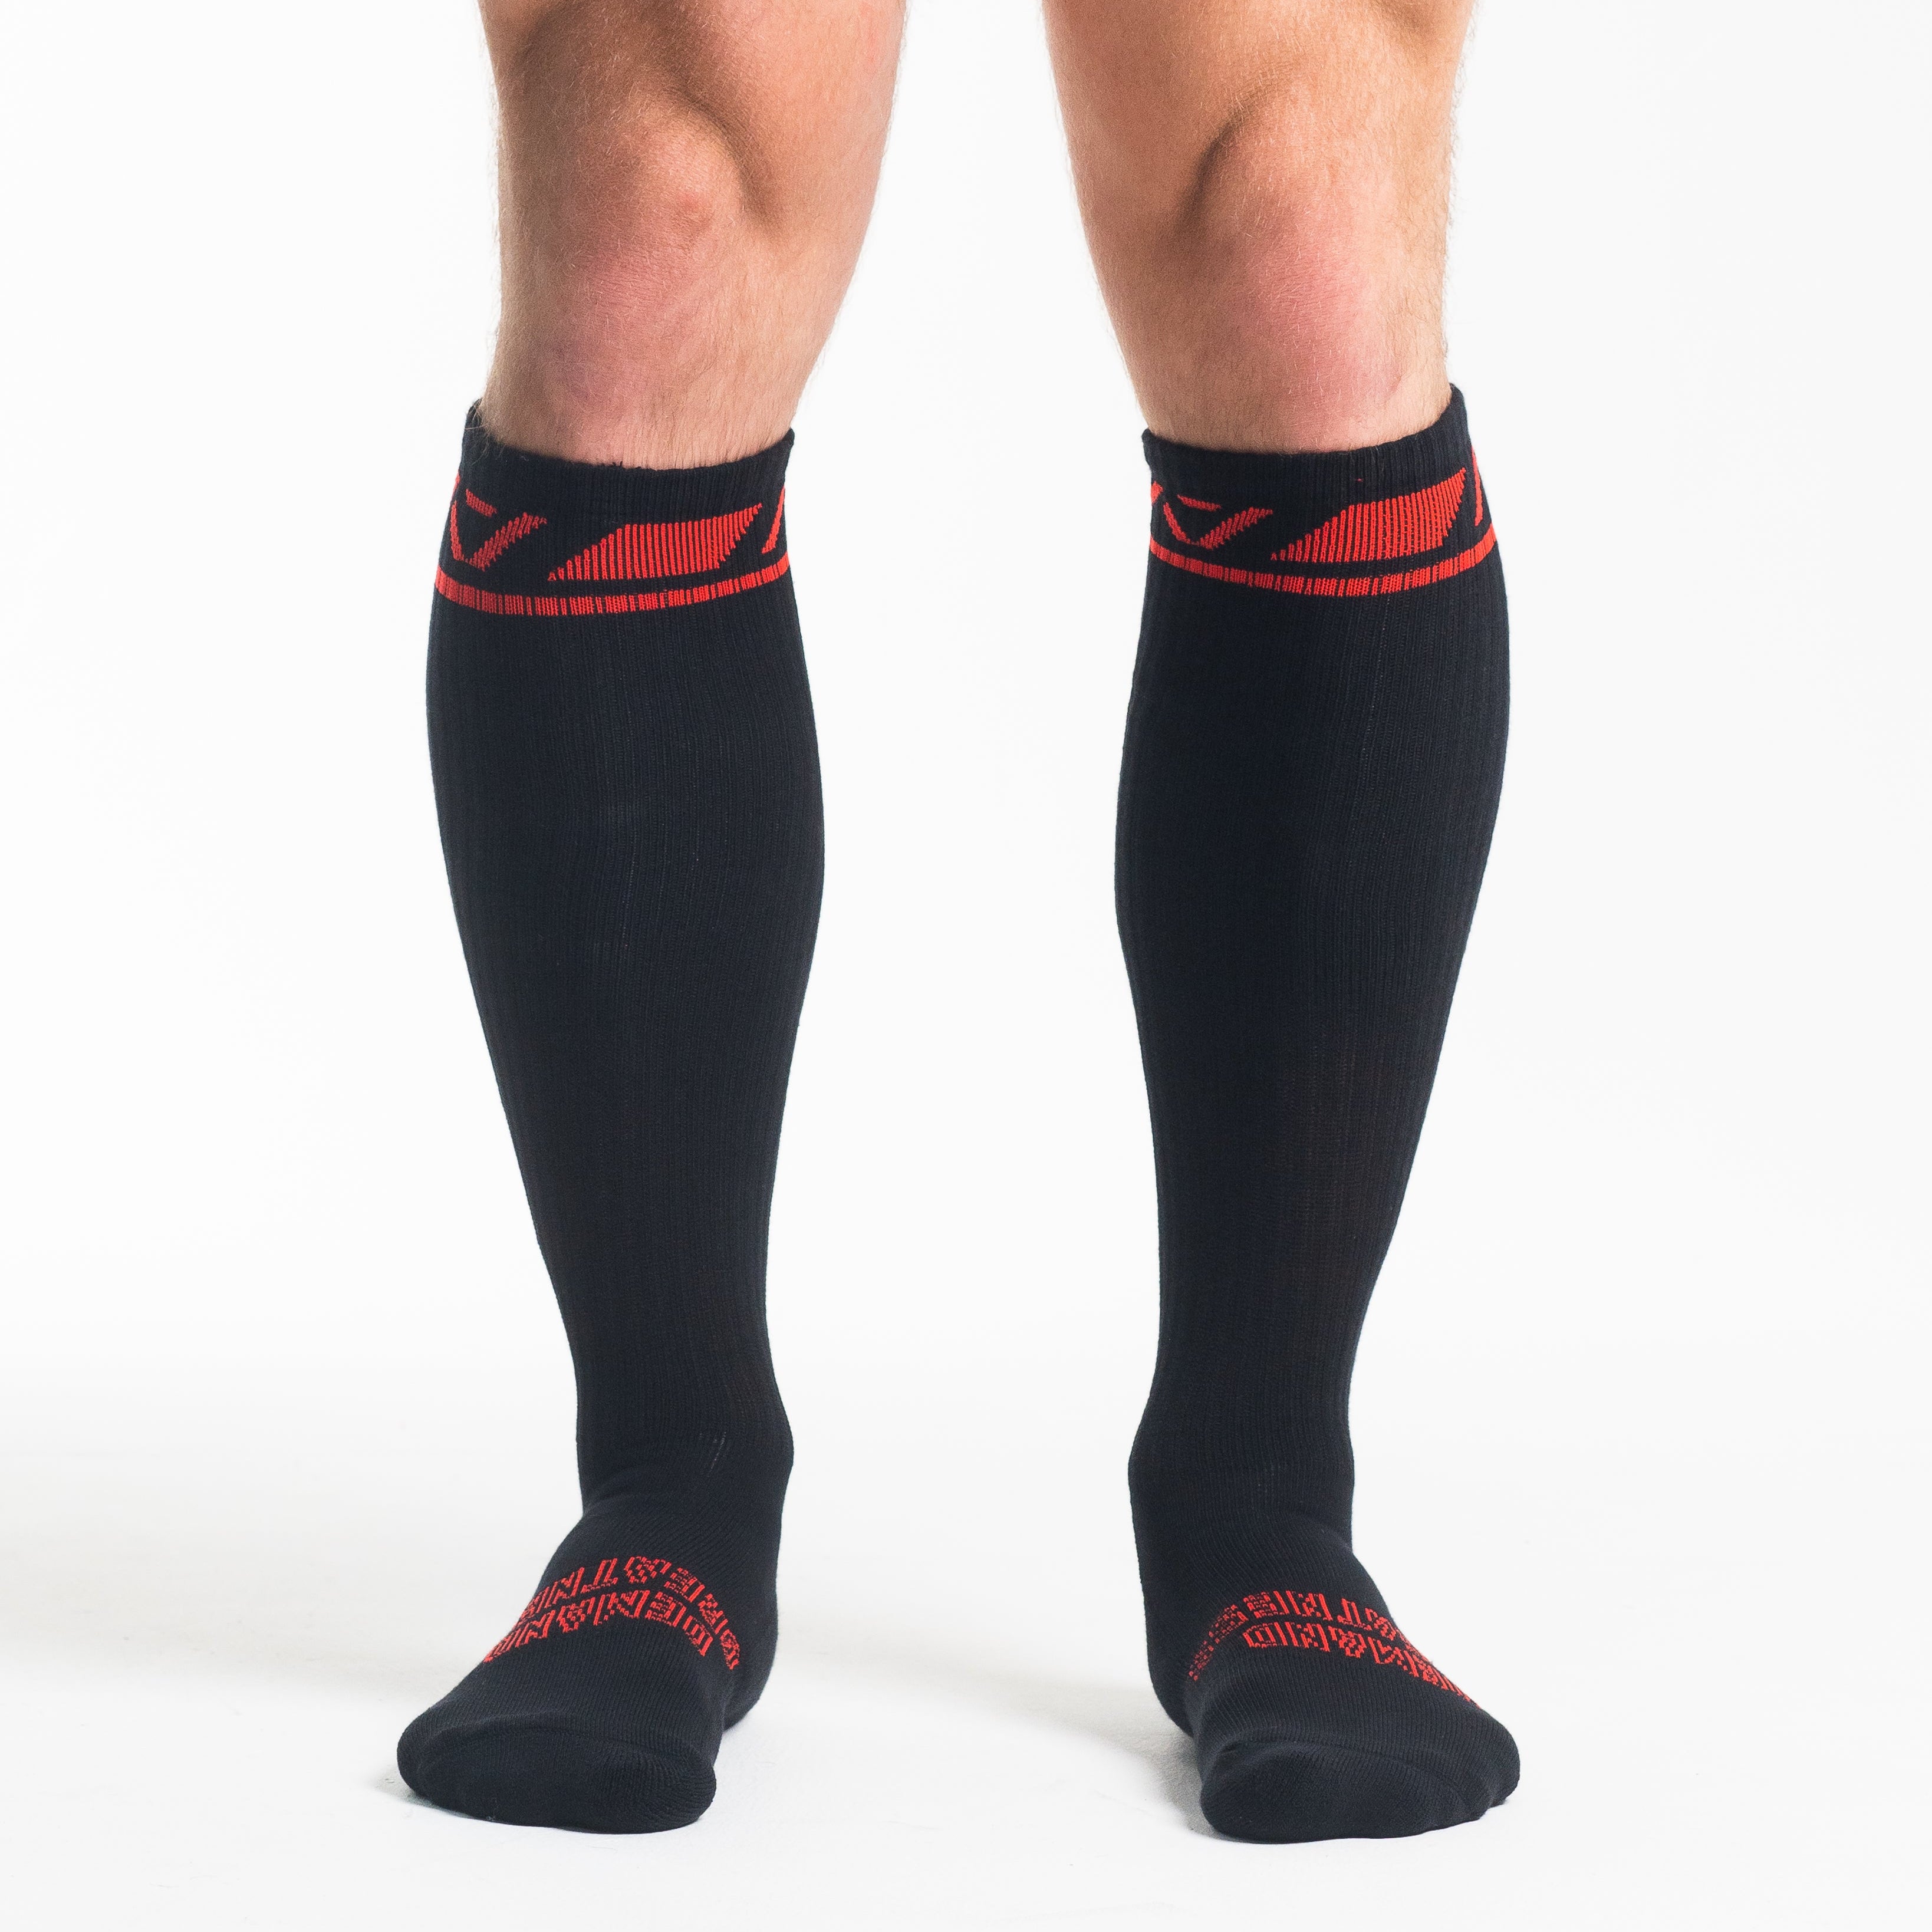 A7 Red Dawn Deadlift socks are designed specifically for pulls and keep your shins protected from scrapes. A7 deadlift socks are a perfect pair to wear in training or powerlifting competition. The IPF Approved Kit includes Powerlifting Singlet, A7 Meet Shirt, A7 Zebra Wrist Wraps, A7 Deadlift Socks, Hourglass Knee Sleeves (Stiff Knee Sleeves and Rigor Mortis Knee Sleeves). All A7 Powerlifting Equipment shipping to UK, Norway, Switzerland and Iceland.